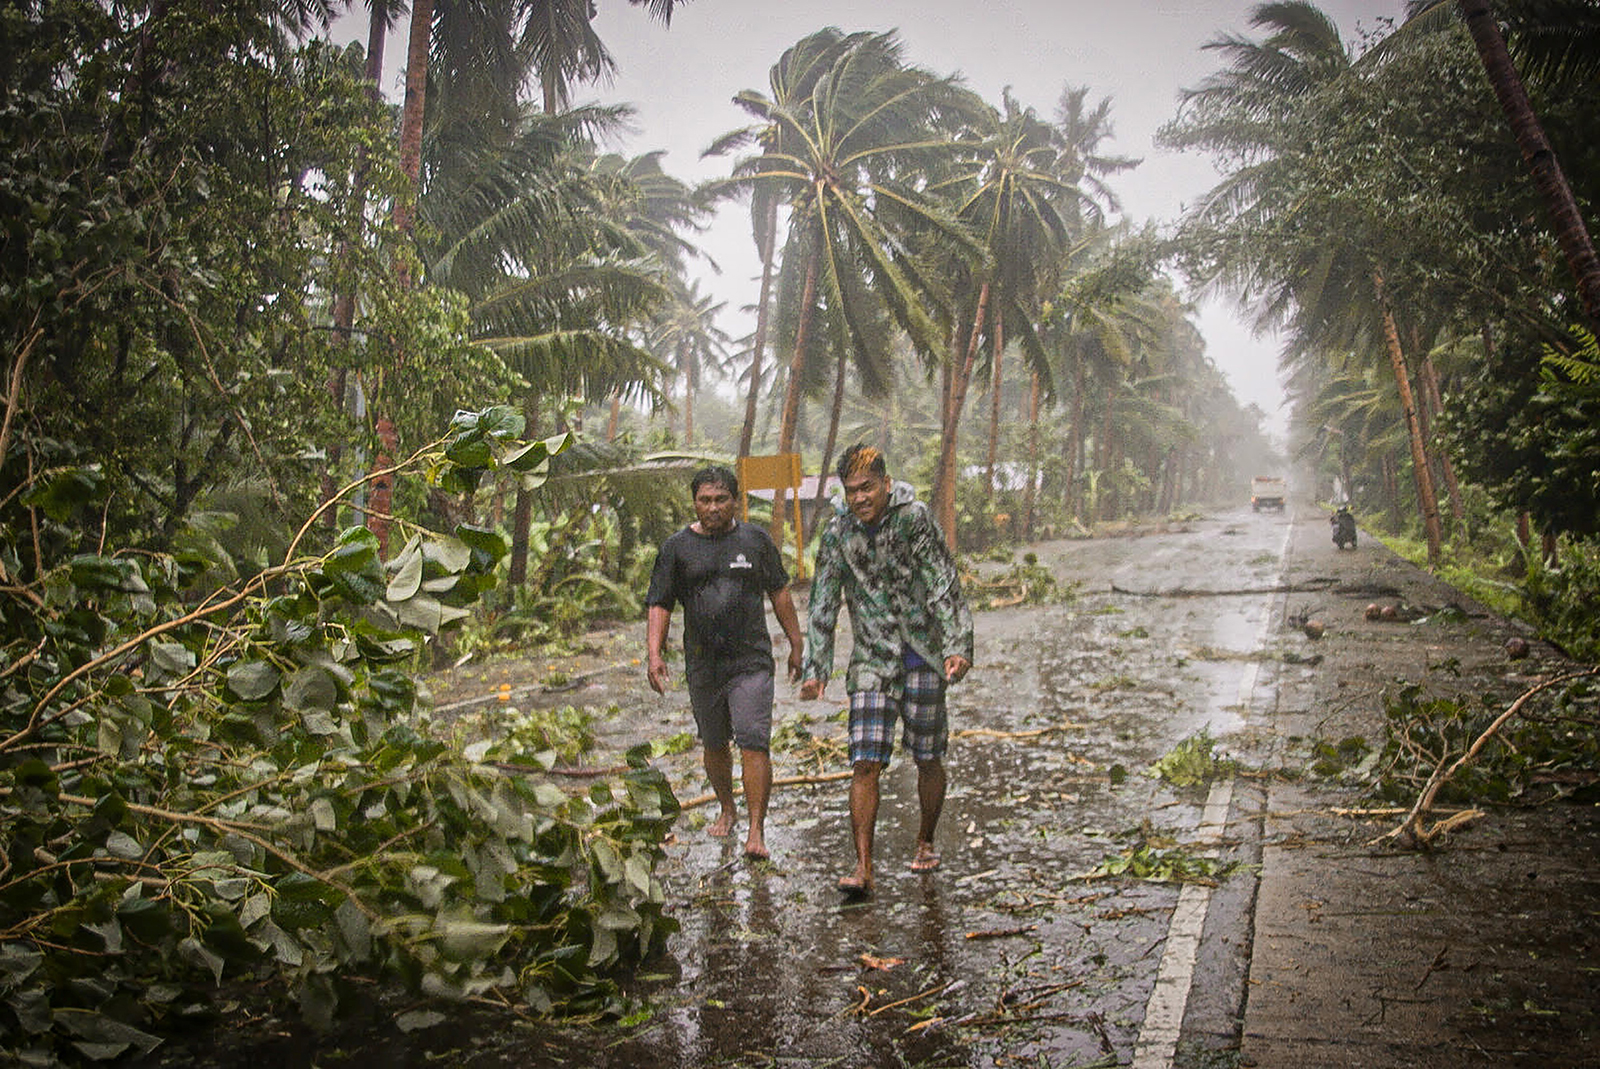 Typhoon evacuees in the Philippines told to practice social distancing